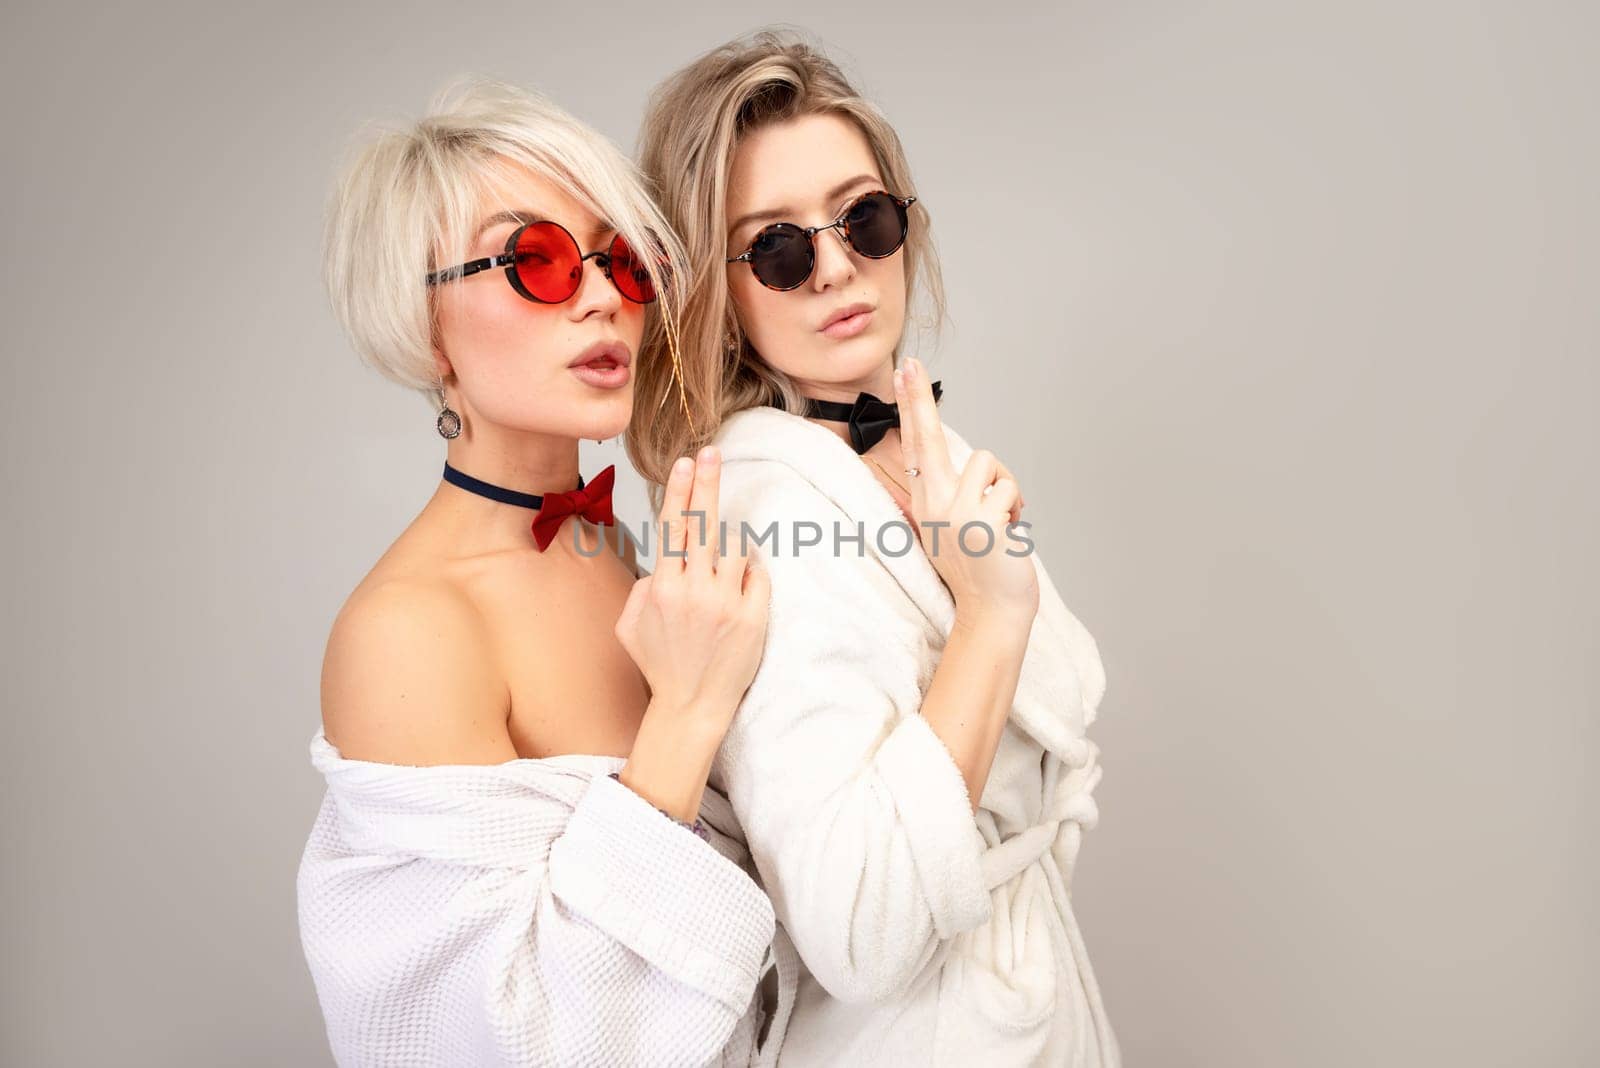 two close friends in white bathrobes and sunglasses stand close to each other and hold their fingers in the shape of a pistol